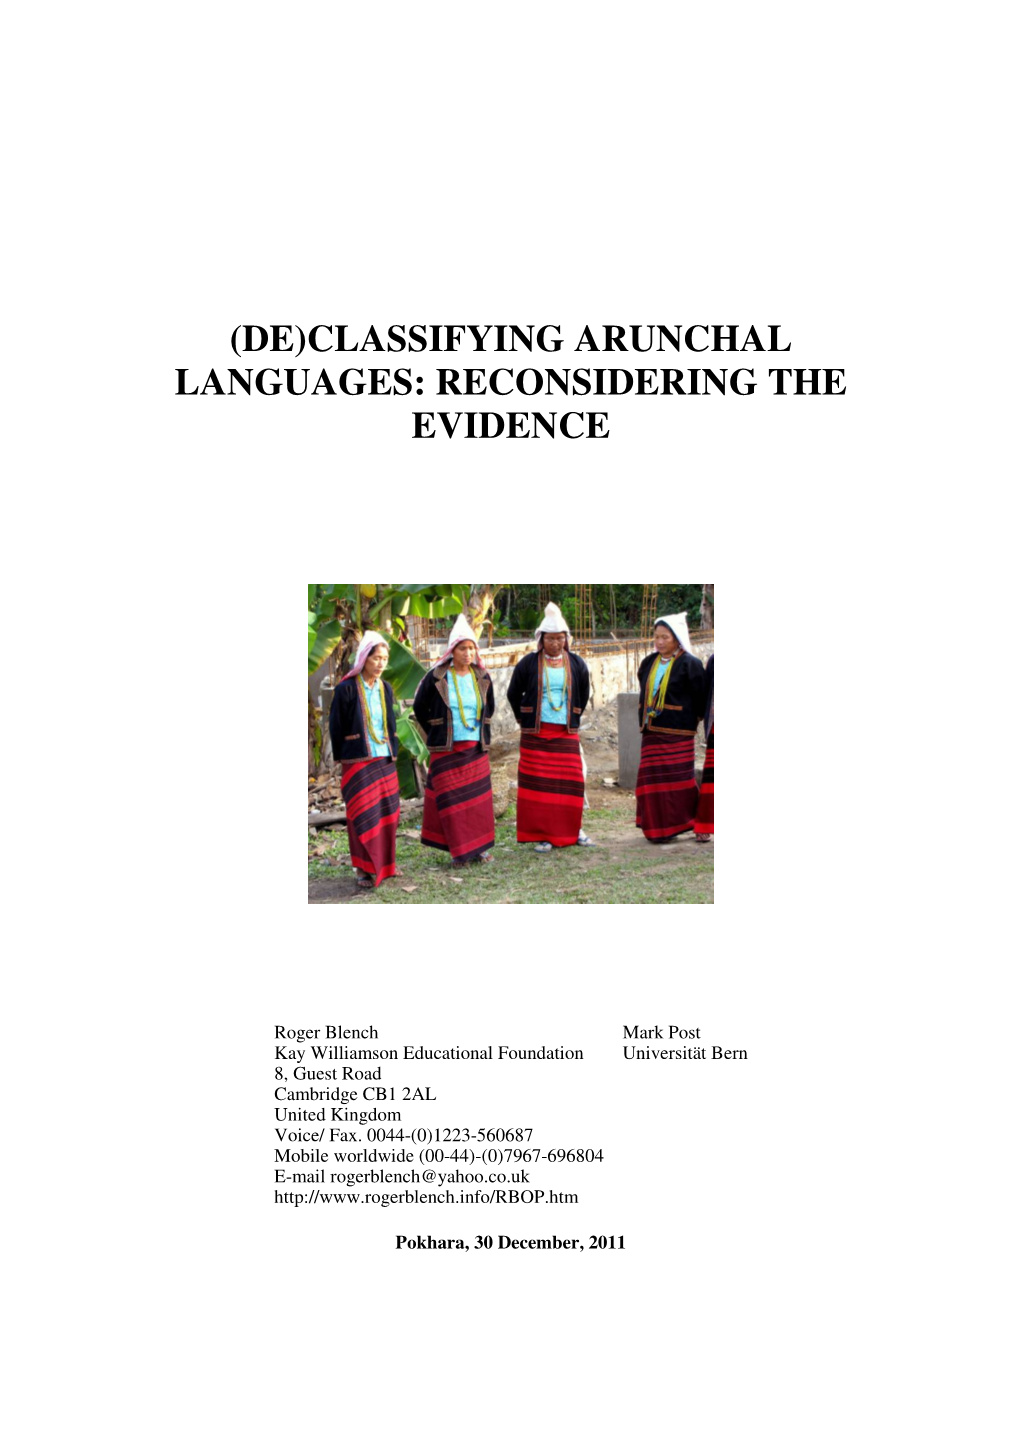 (De)Classifying Arunchal Languages: Reconsidering the Evidence